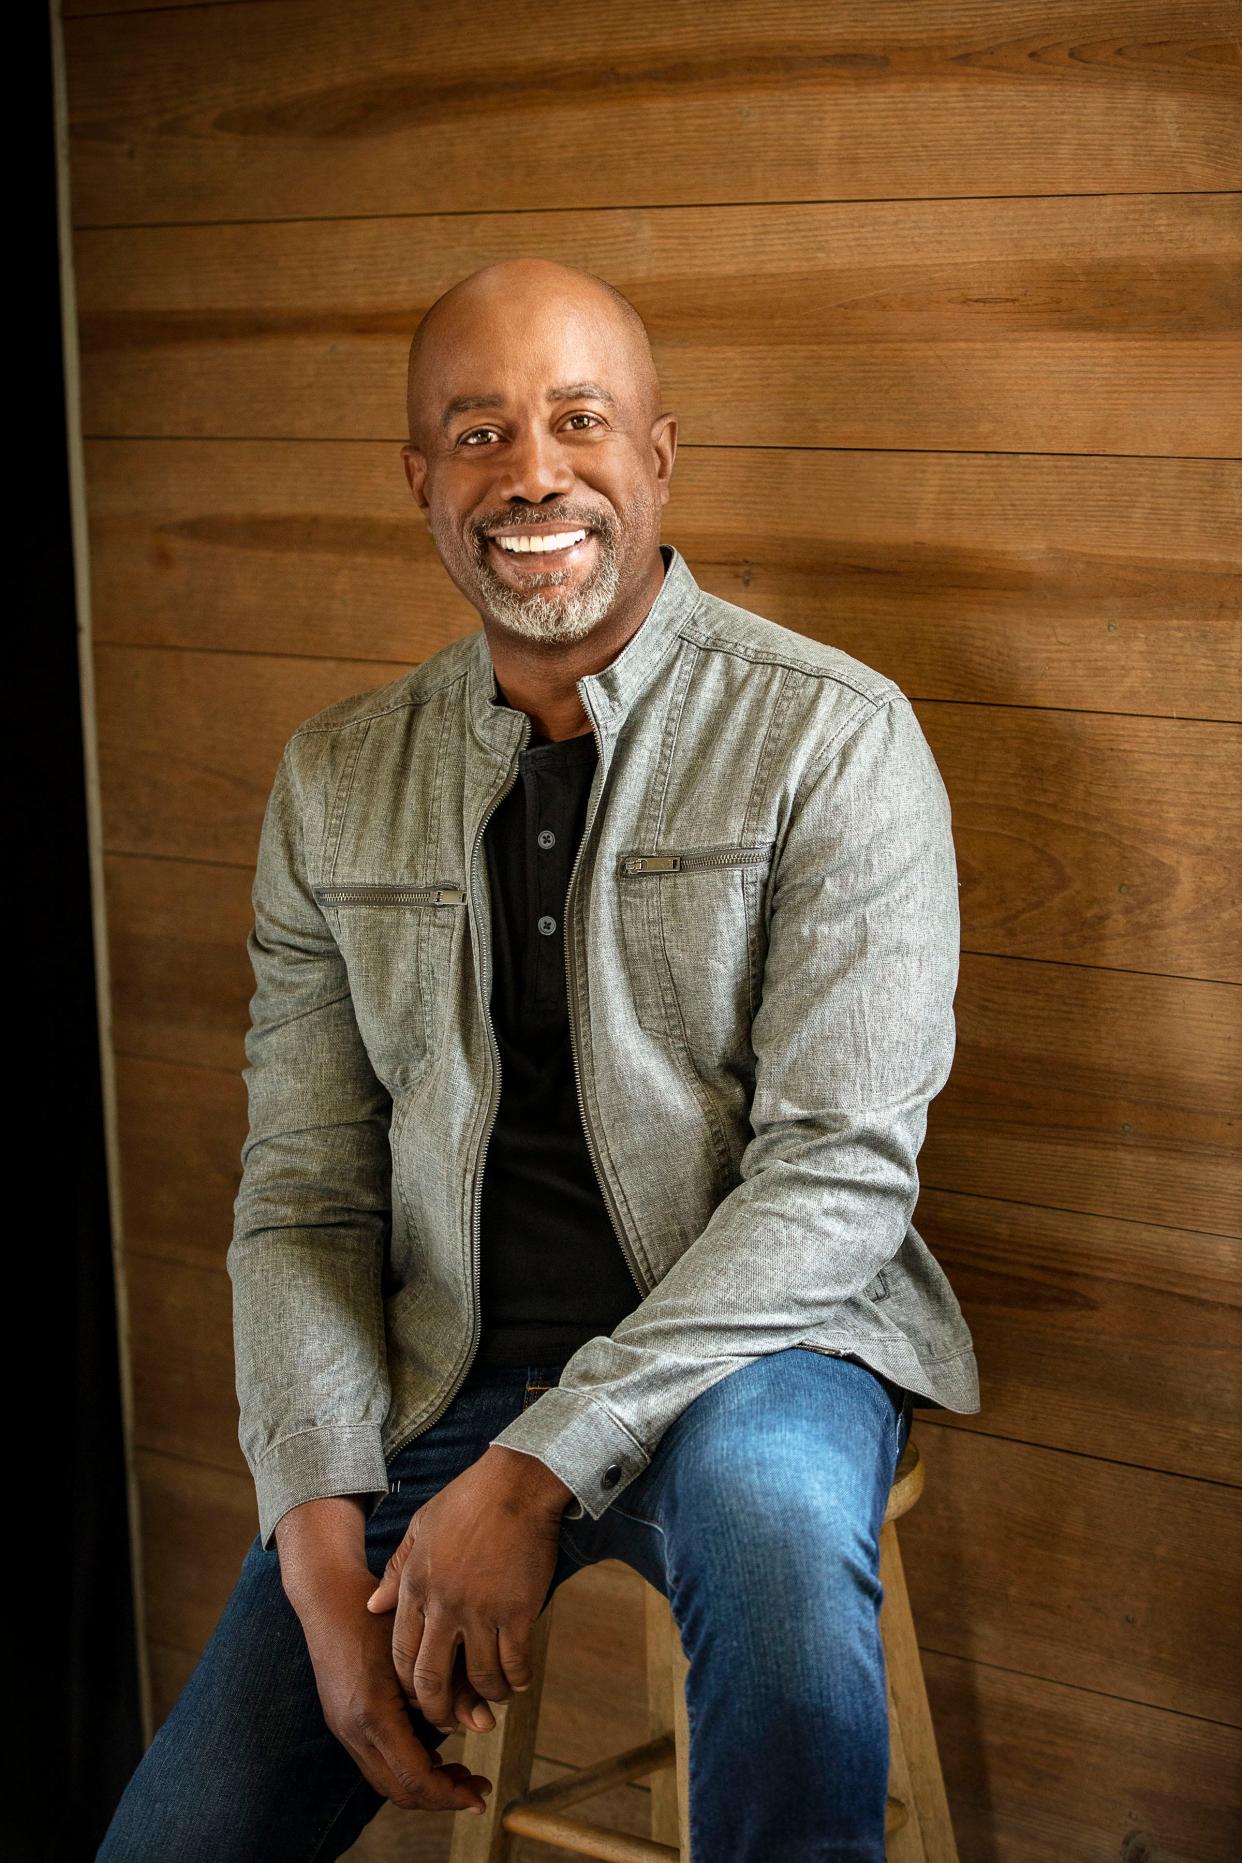 Darius Rucker will perform before the NASCAR Echopark Automotive Grand Prix at Circuit of the Americas on March 26.